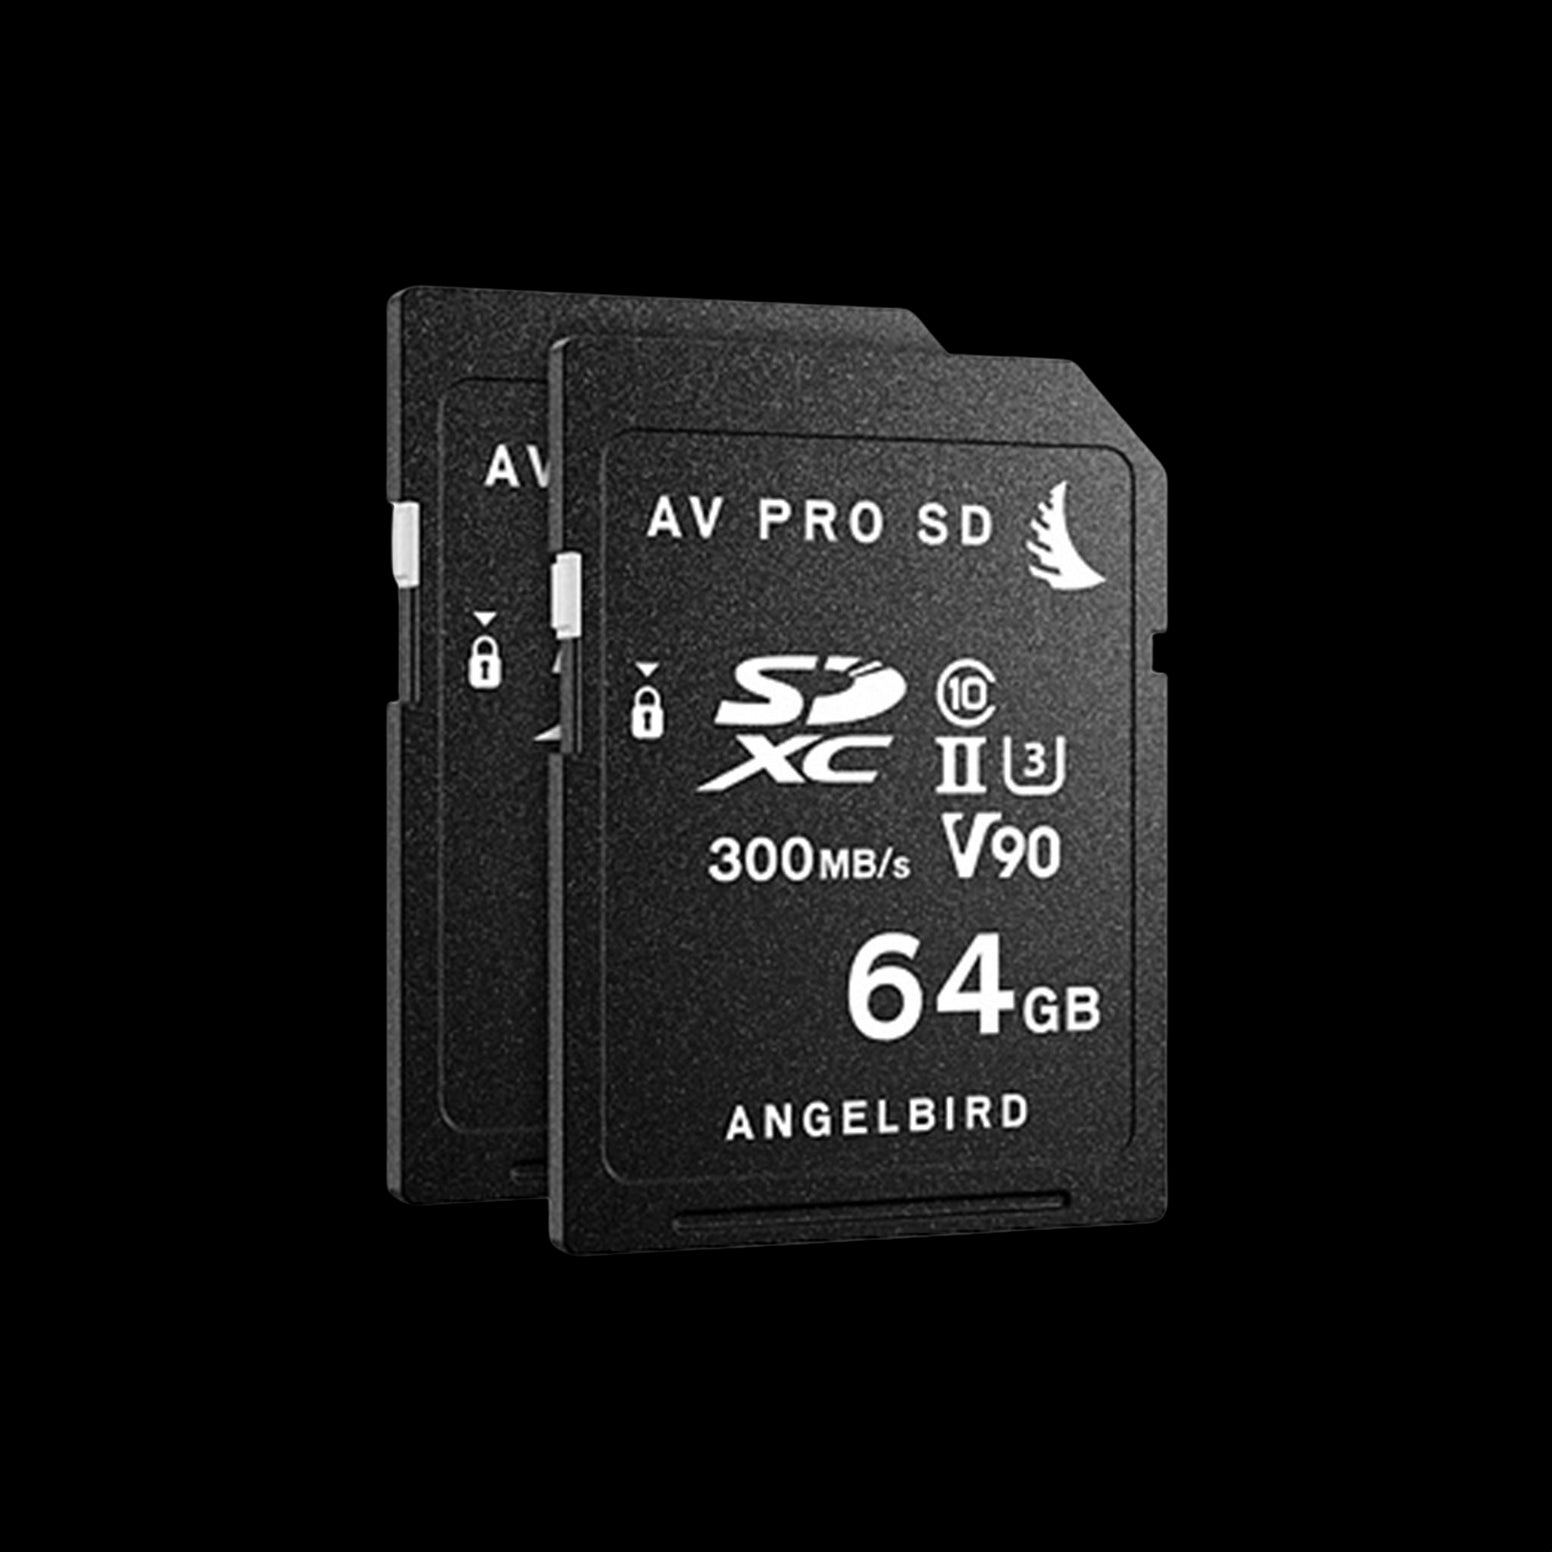 Angelbird Match Pack for Panasonic GH5/GH5S - 2 x 64GB AV PRO V90 Memory Cards - Discontinued